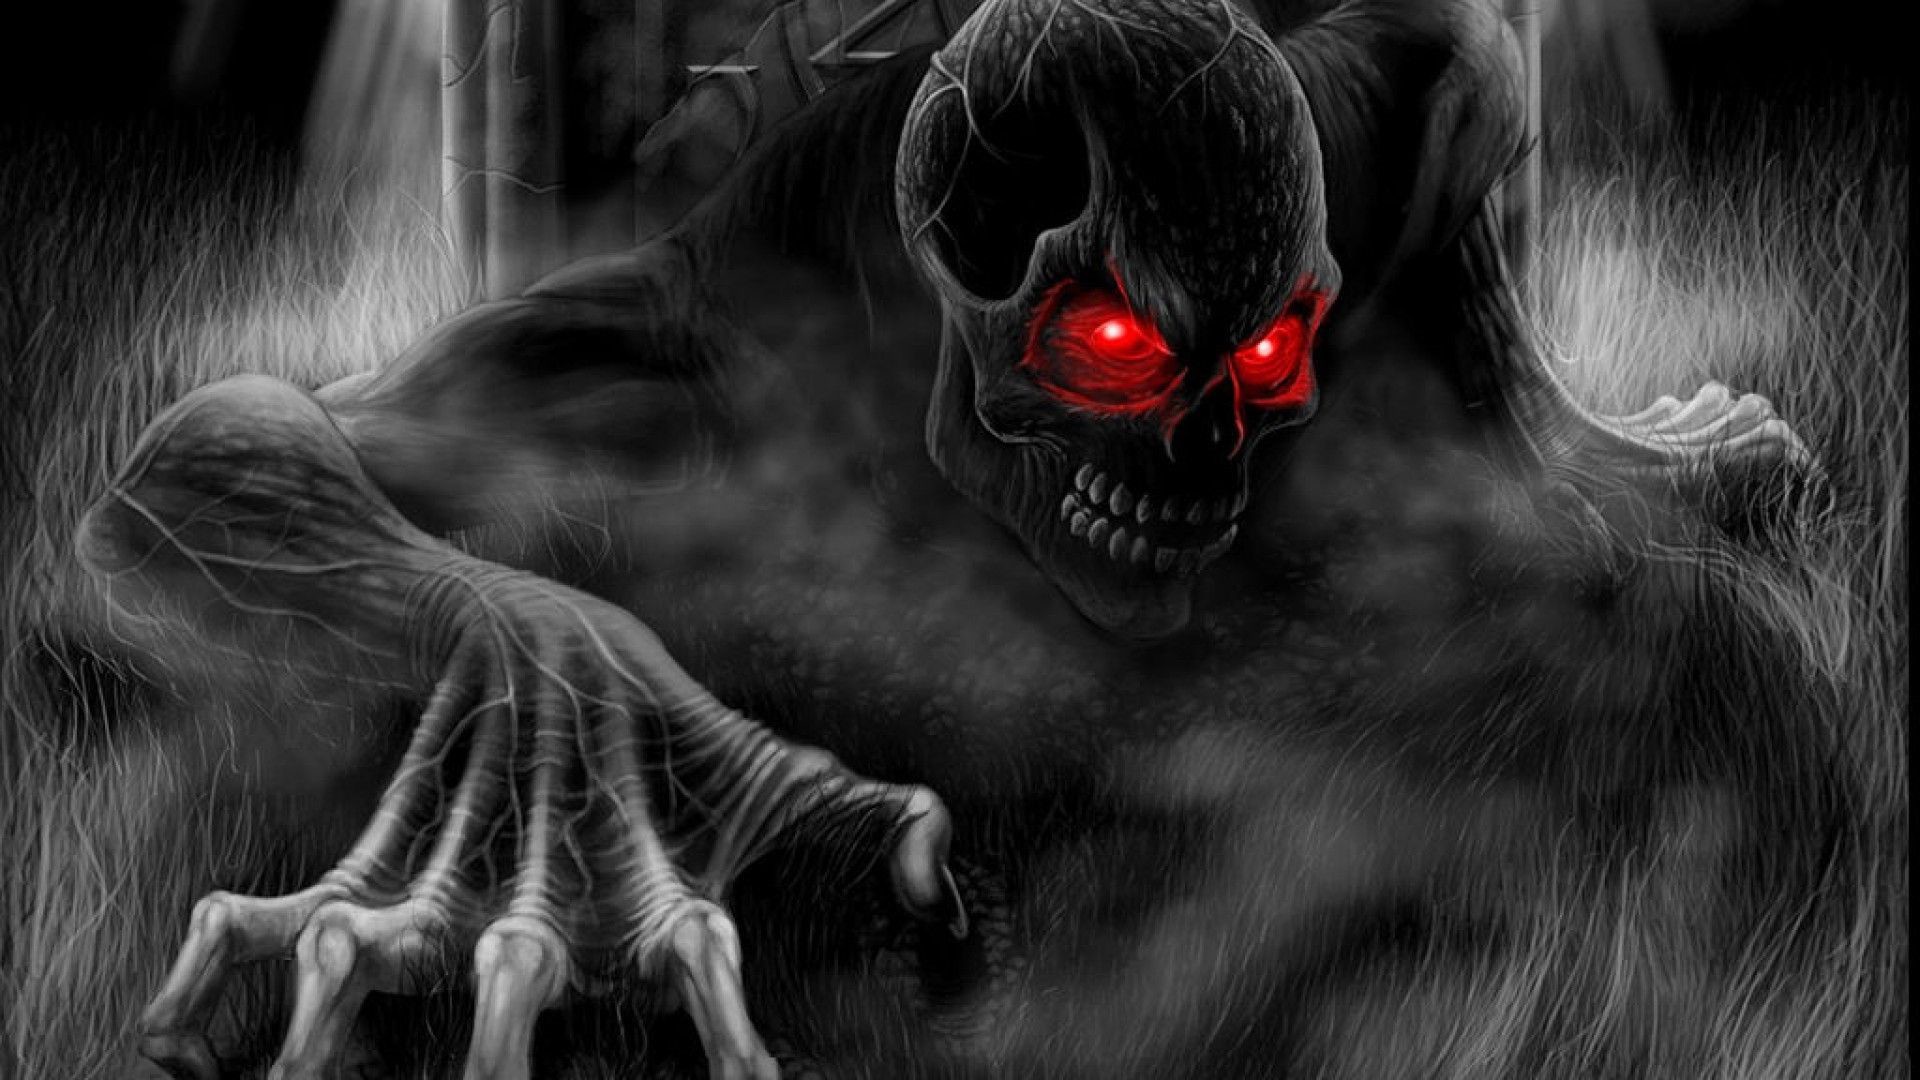 1920x1080 Horror HD Wallpapers : Find best latest Horror HD Wallpapers for your PC  desktop background & mobile phones.